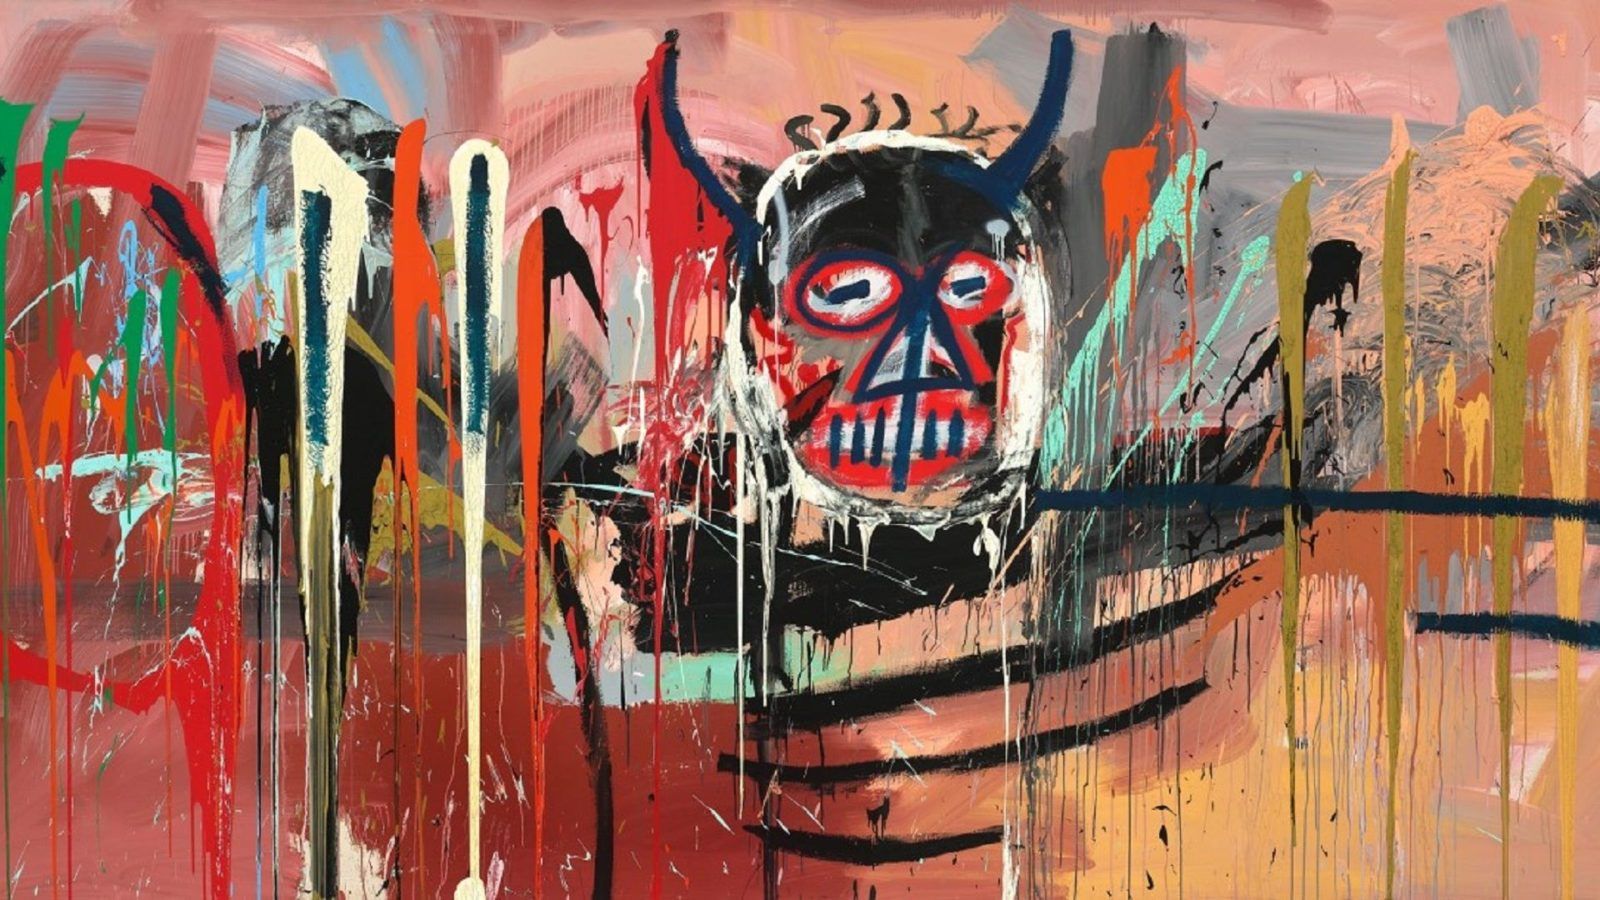 ‘Untitled,’ Famed Artwork by Jean-Michel Basquiat, Will Be Put on Auctioned in New York by Yusaku Maezawa